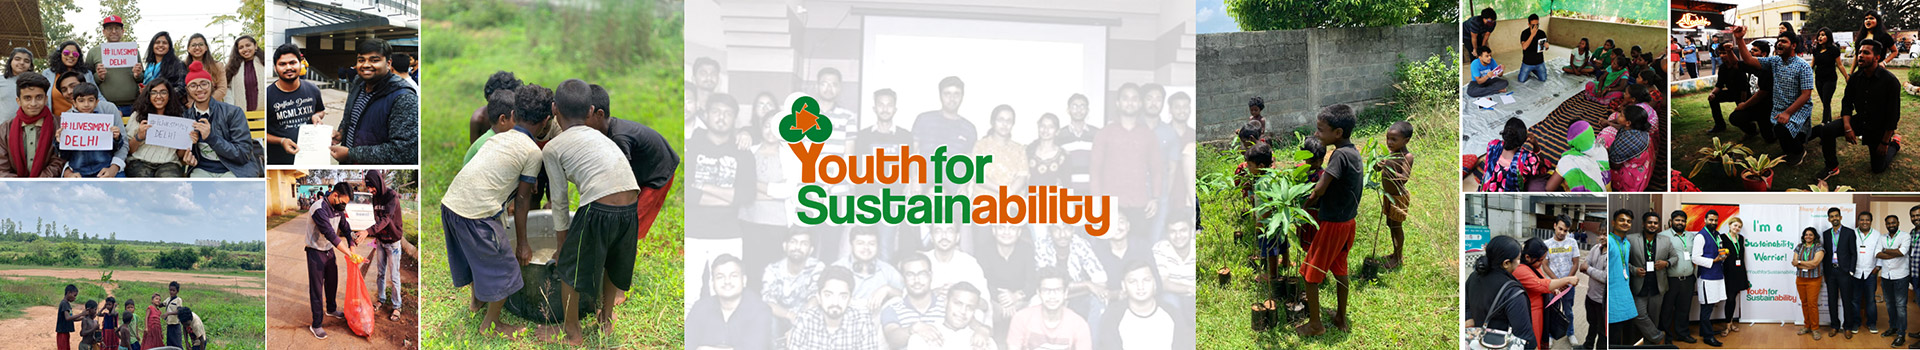 Youth For Sustainability - Official Merchandise